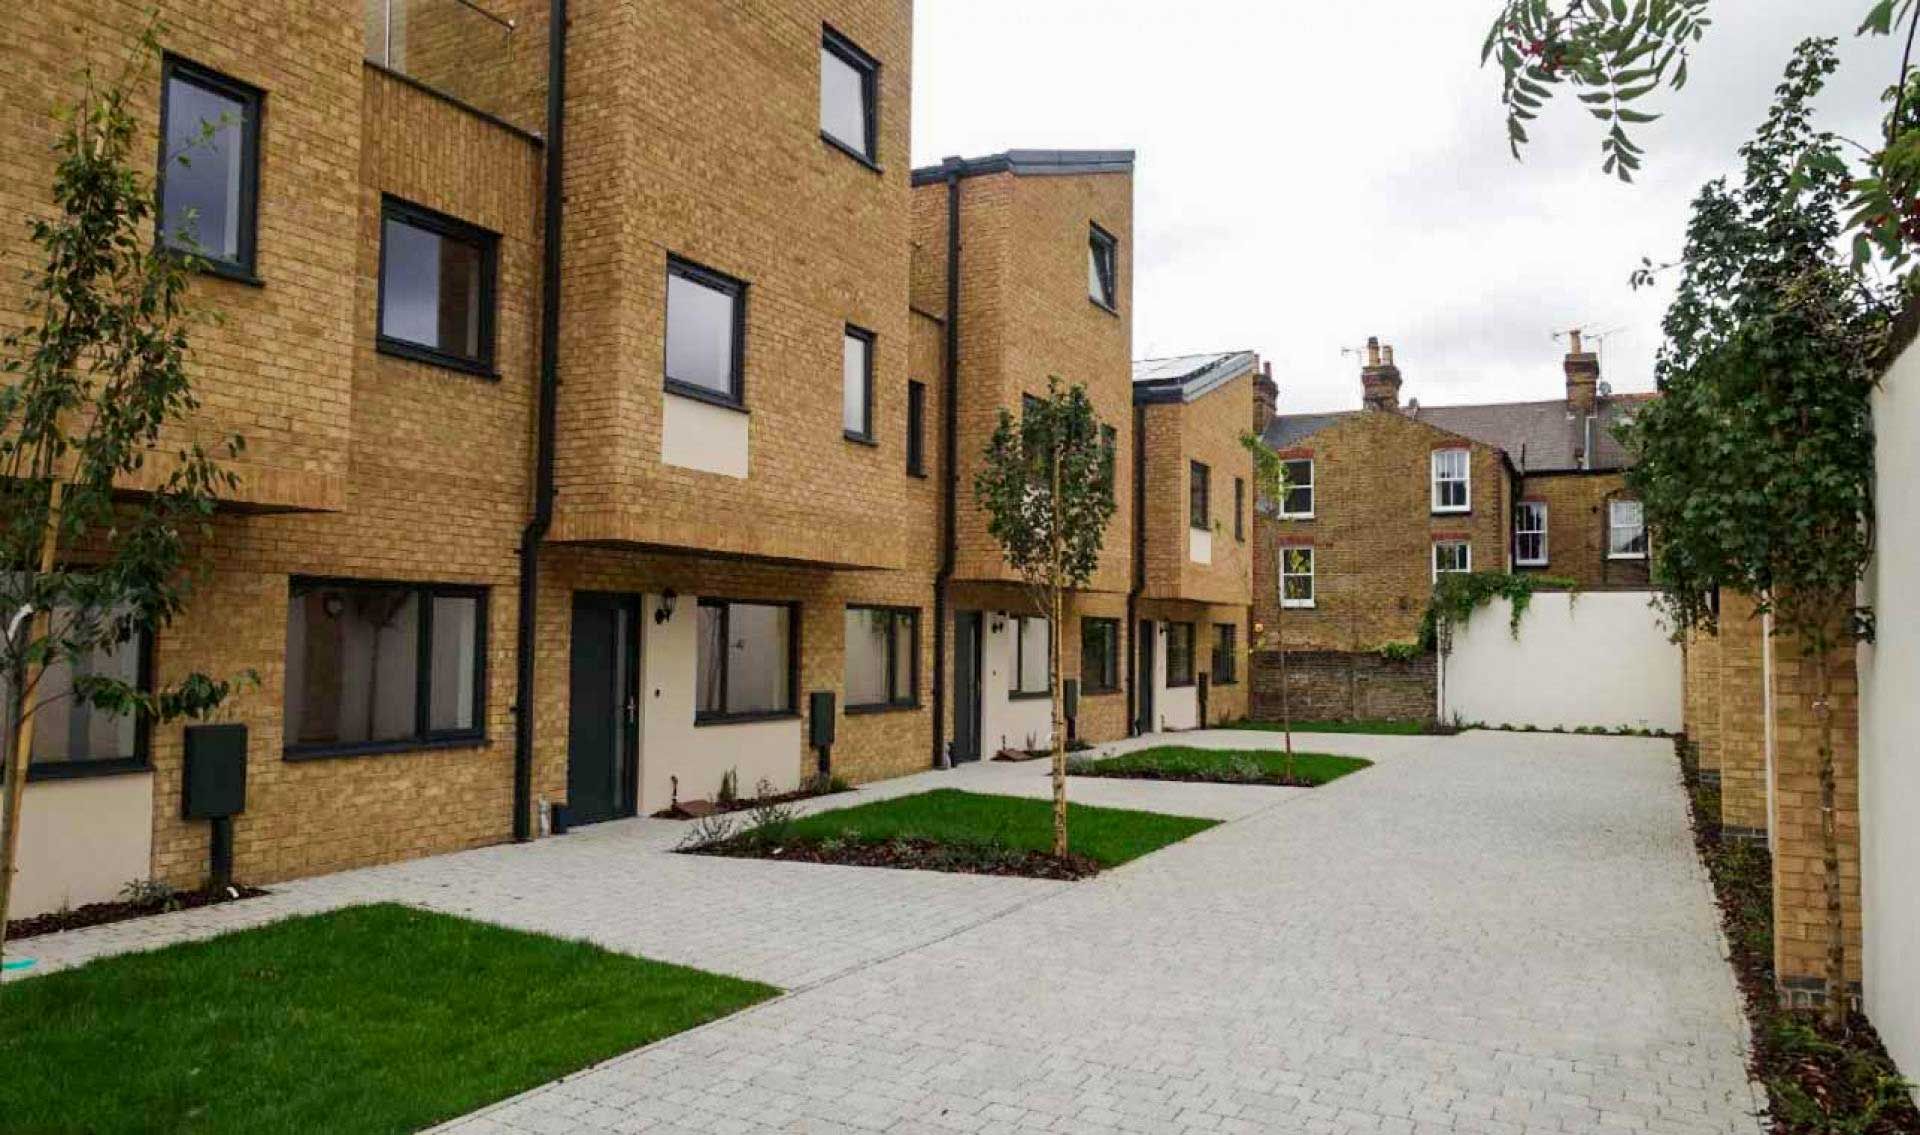 Completed development of five new houses.